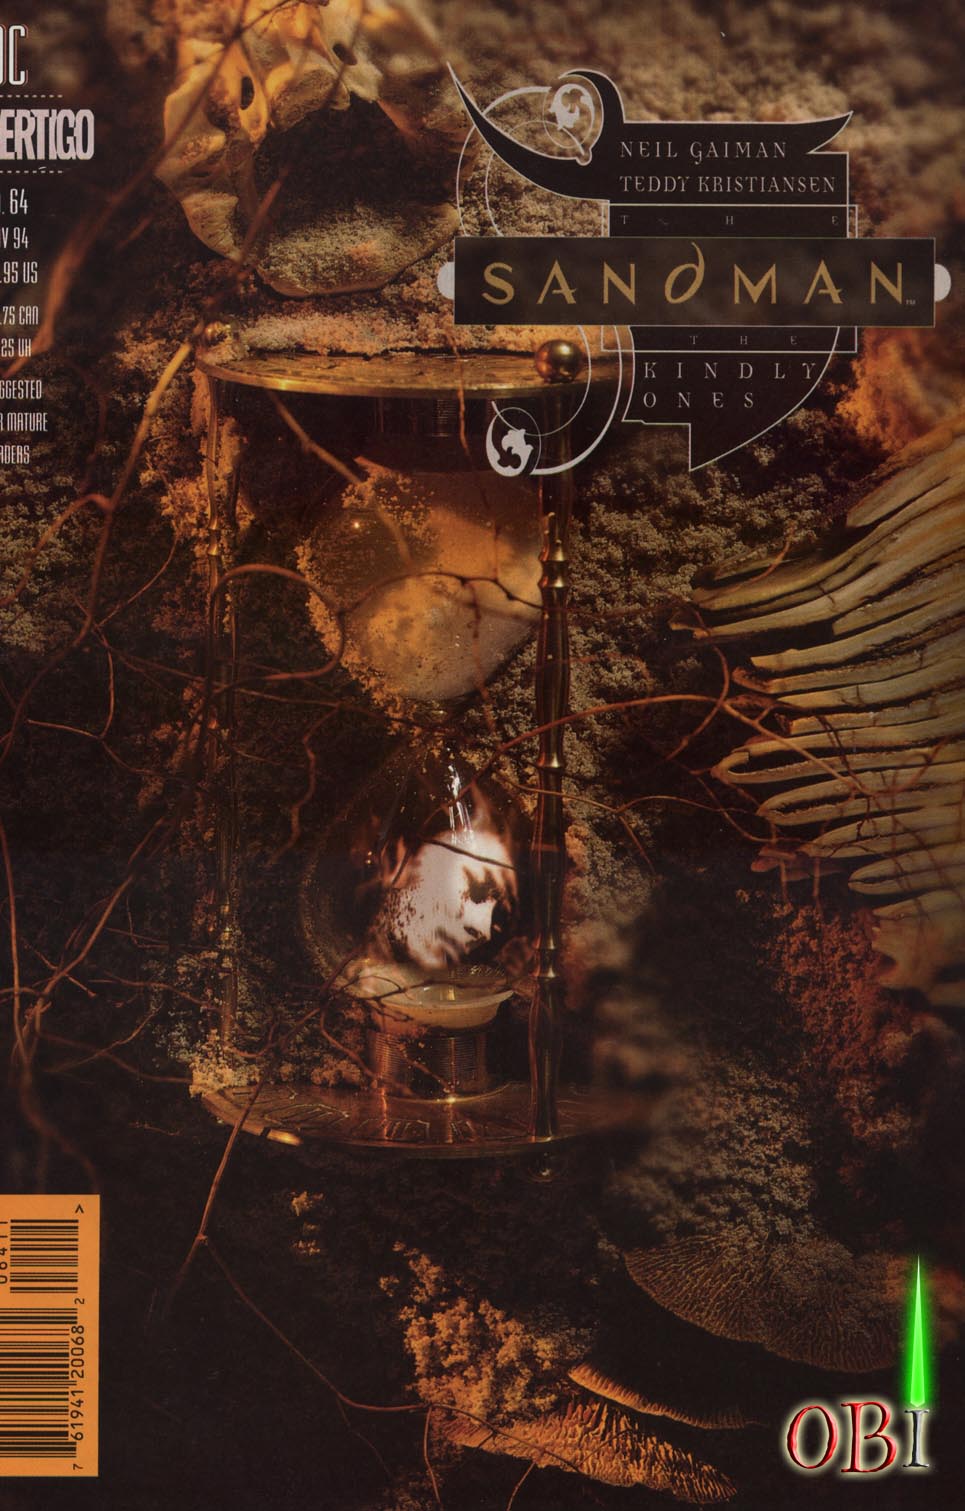 The Sandman #64 The Kindly Ones Part 8 of